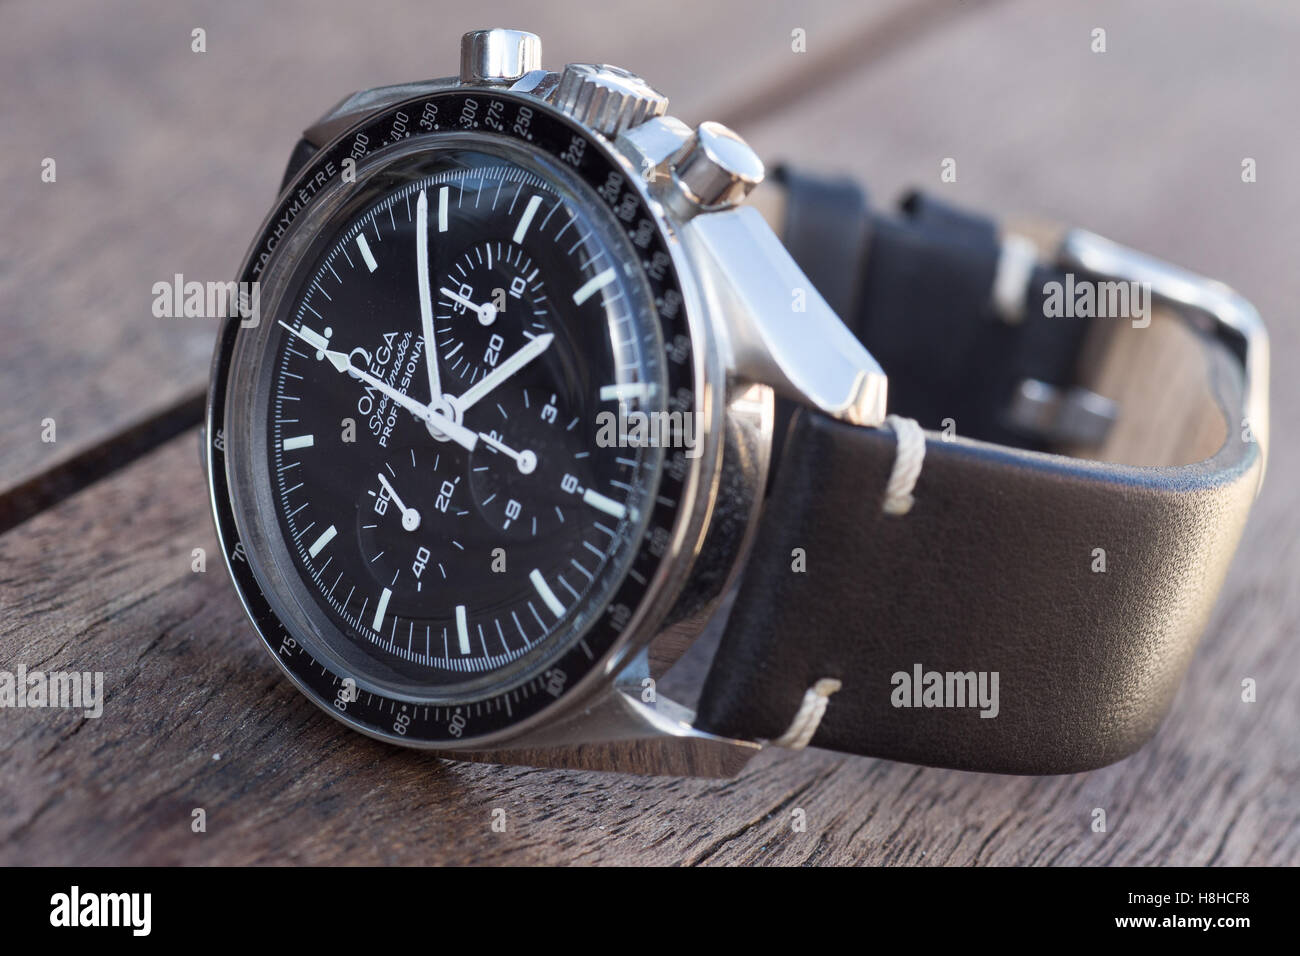 omega moonwatch leather